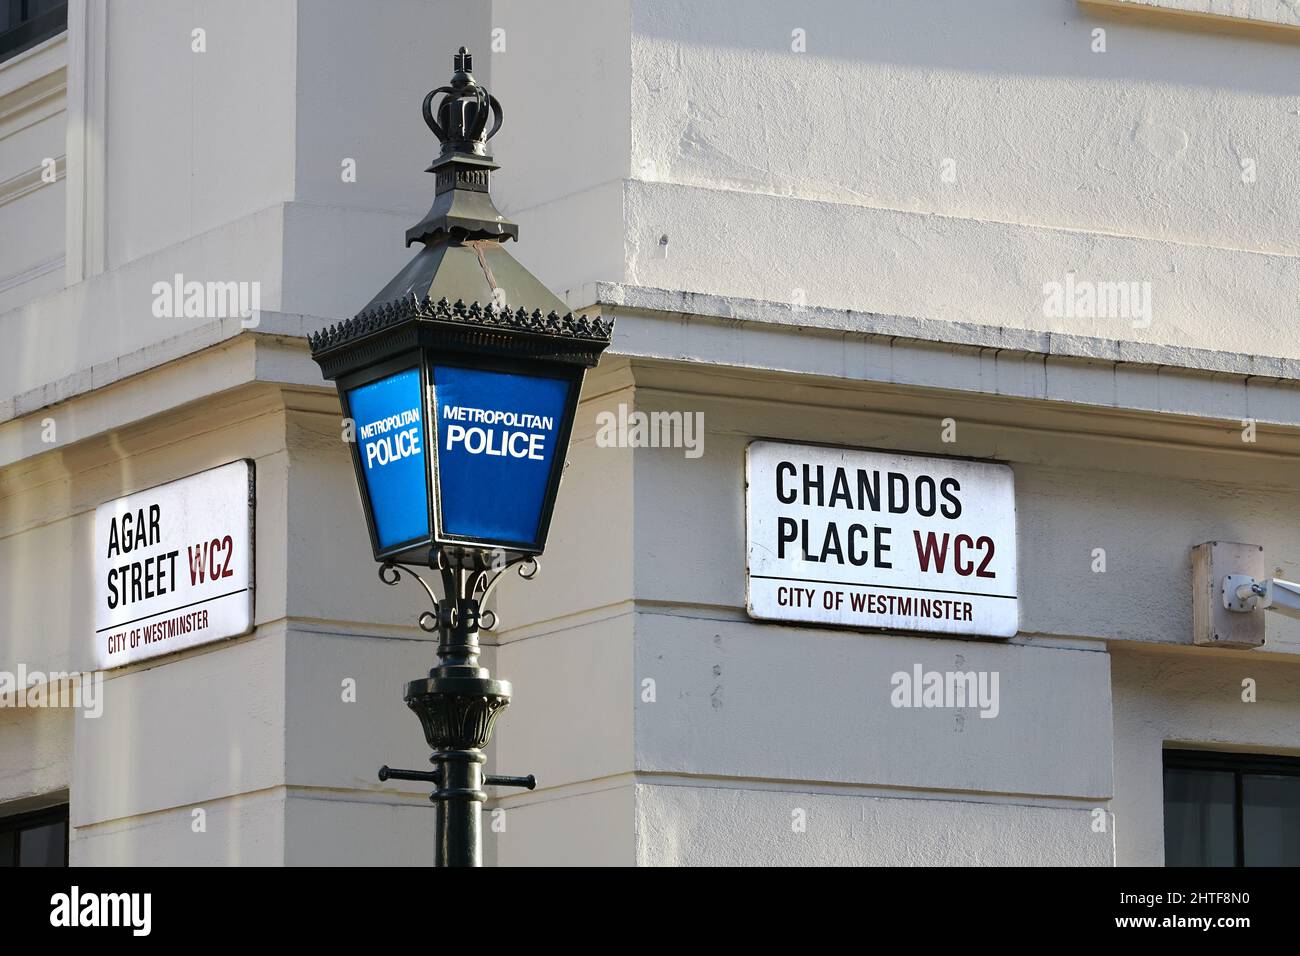 Old fashioned police blue lamp outside the Charing Cross metropolitan police station, Chandos Place and Agar Street, WC2, City of Westminster, London. Stock Photo